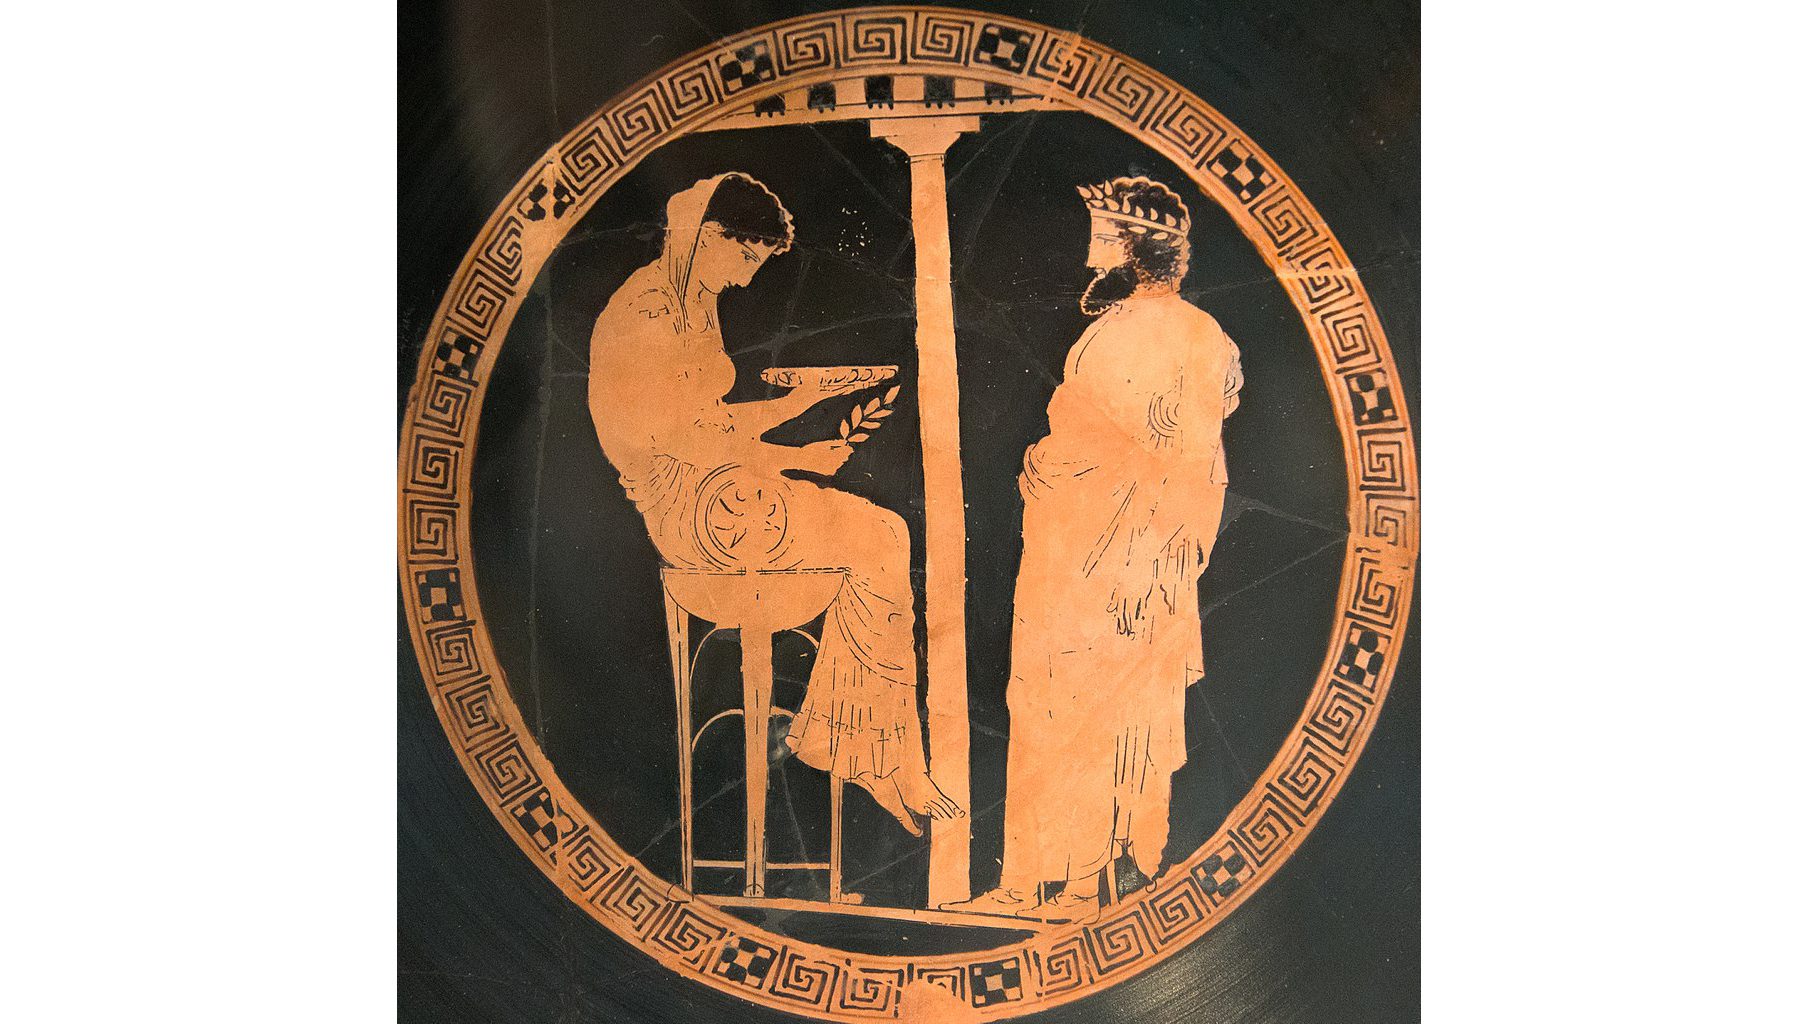 The priestess Pythia at the Delphic Oracle, who spoke truth to power